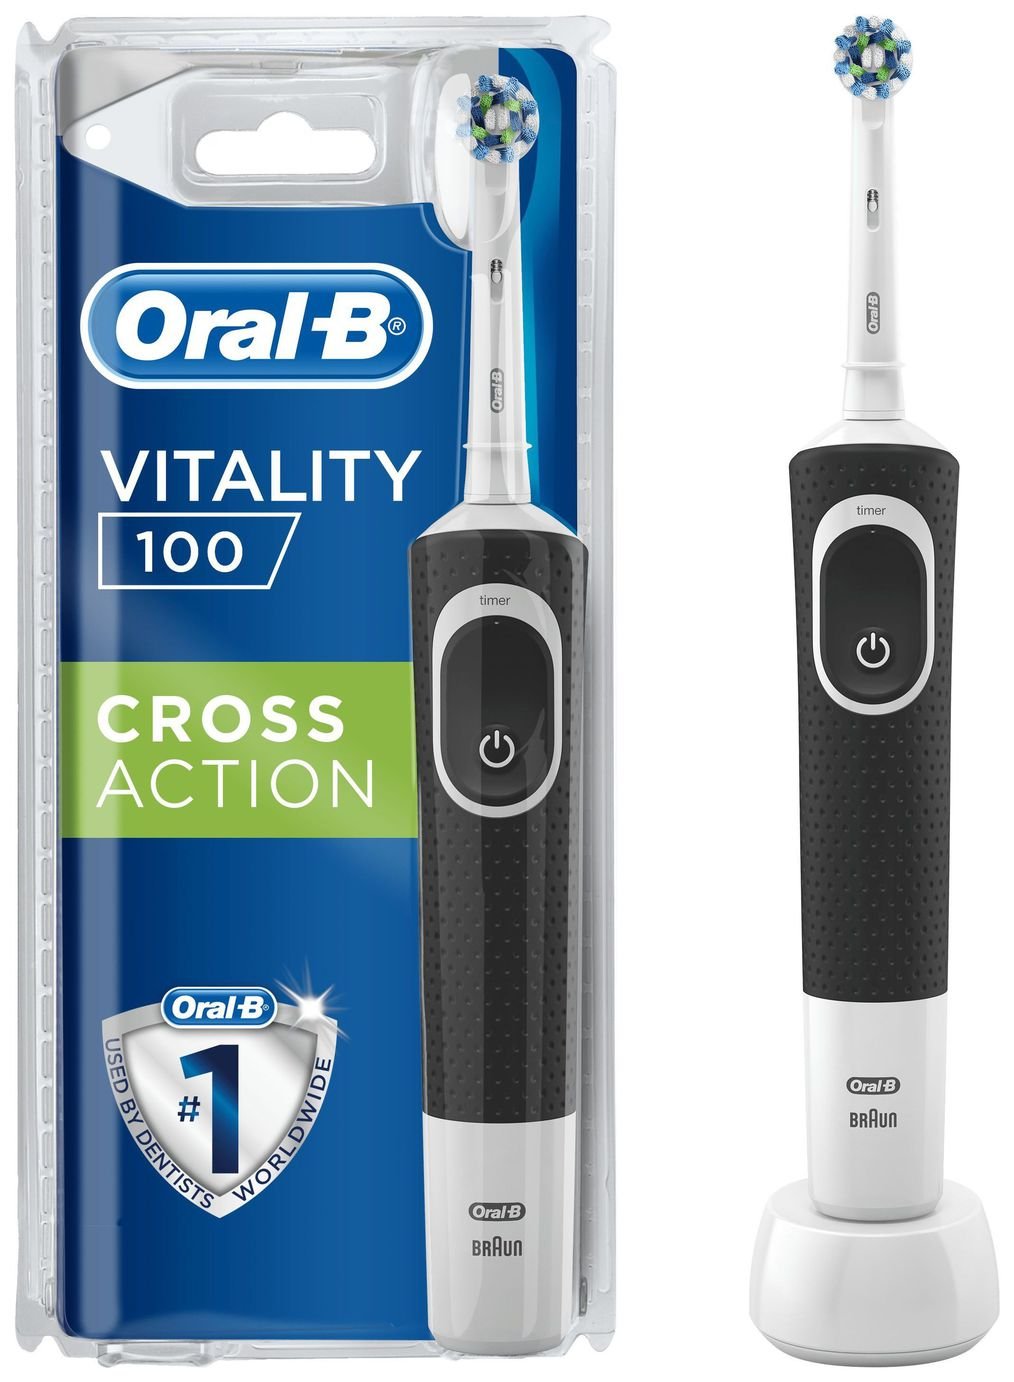 Oral B Electric Toothbrush Specials